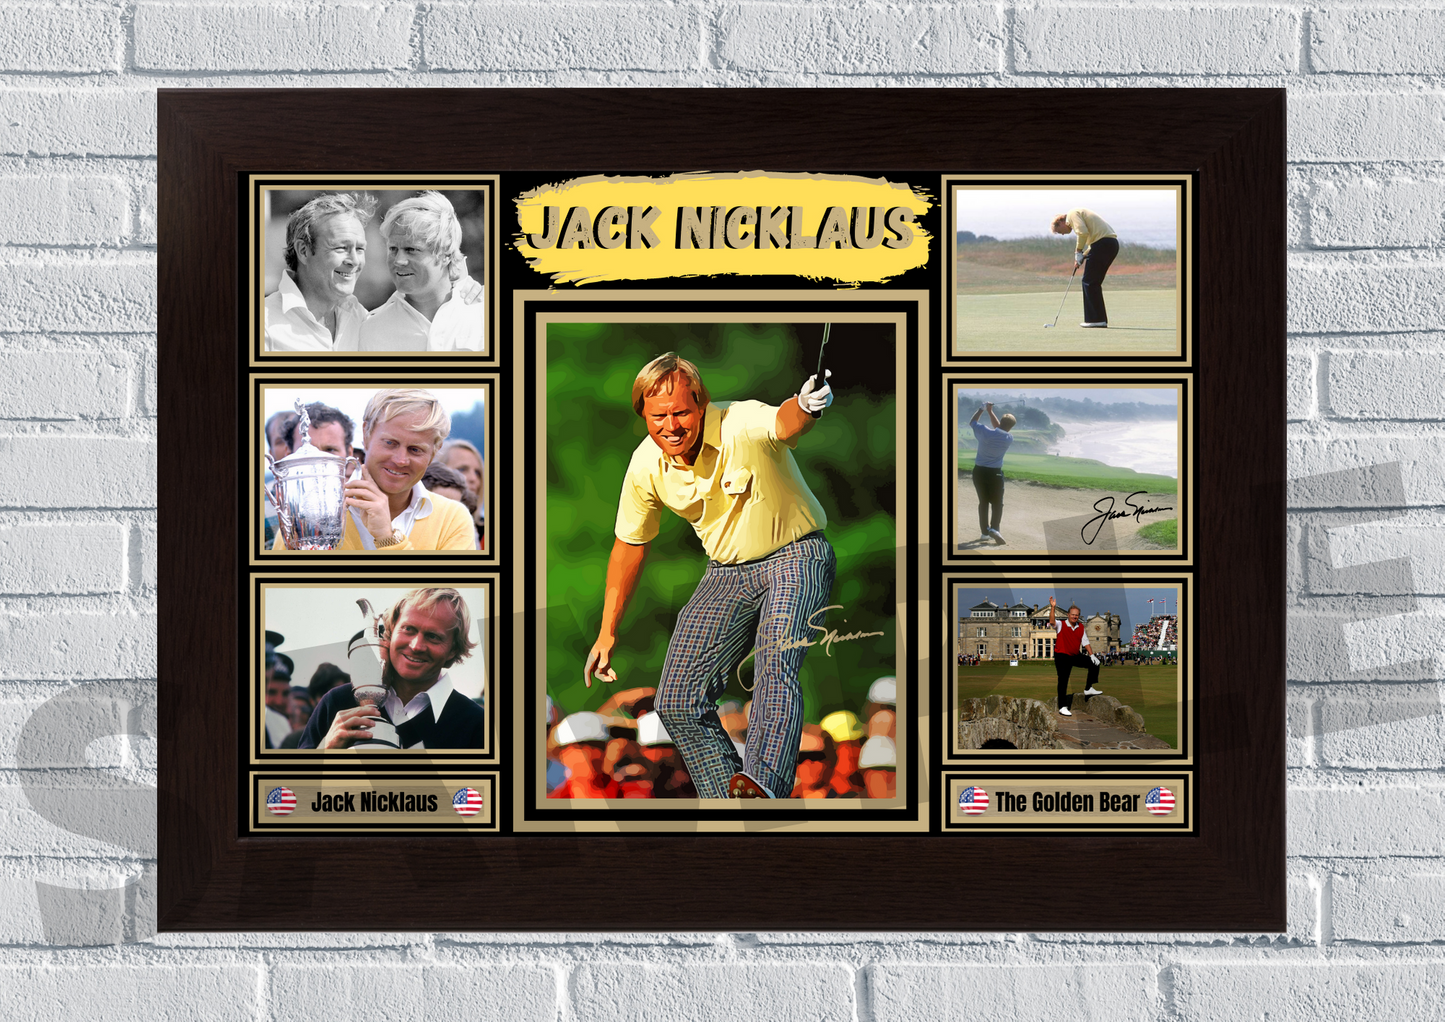 Jack Nicklaus (Golf) Memorabilia/collectable Signed print #93